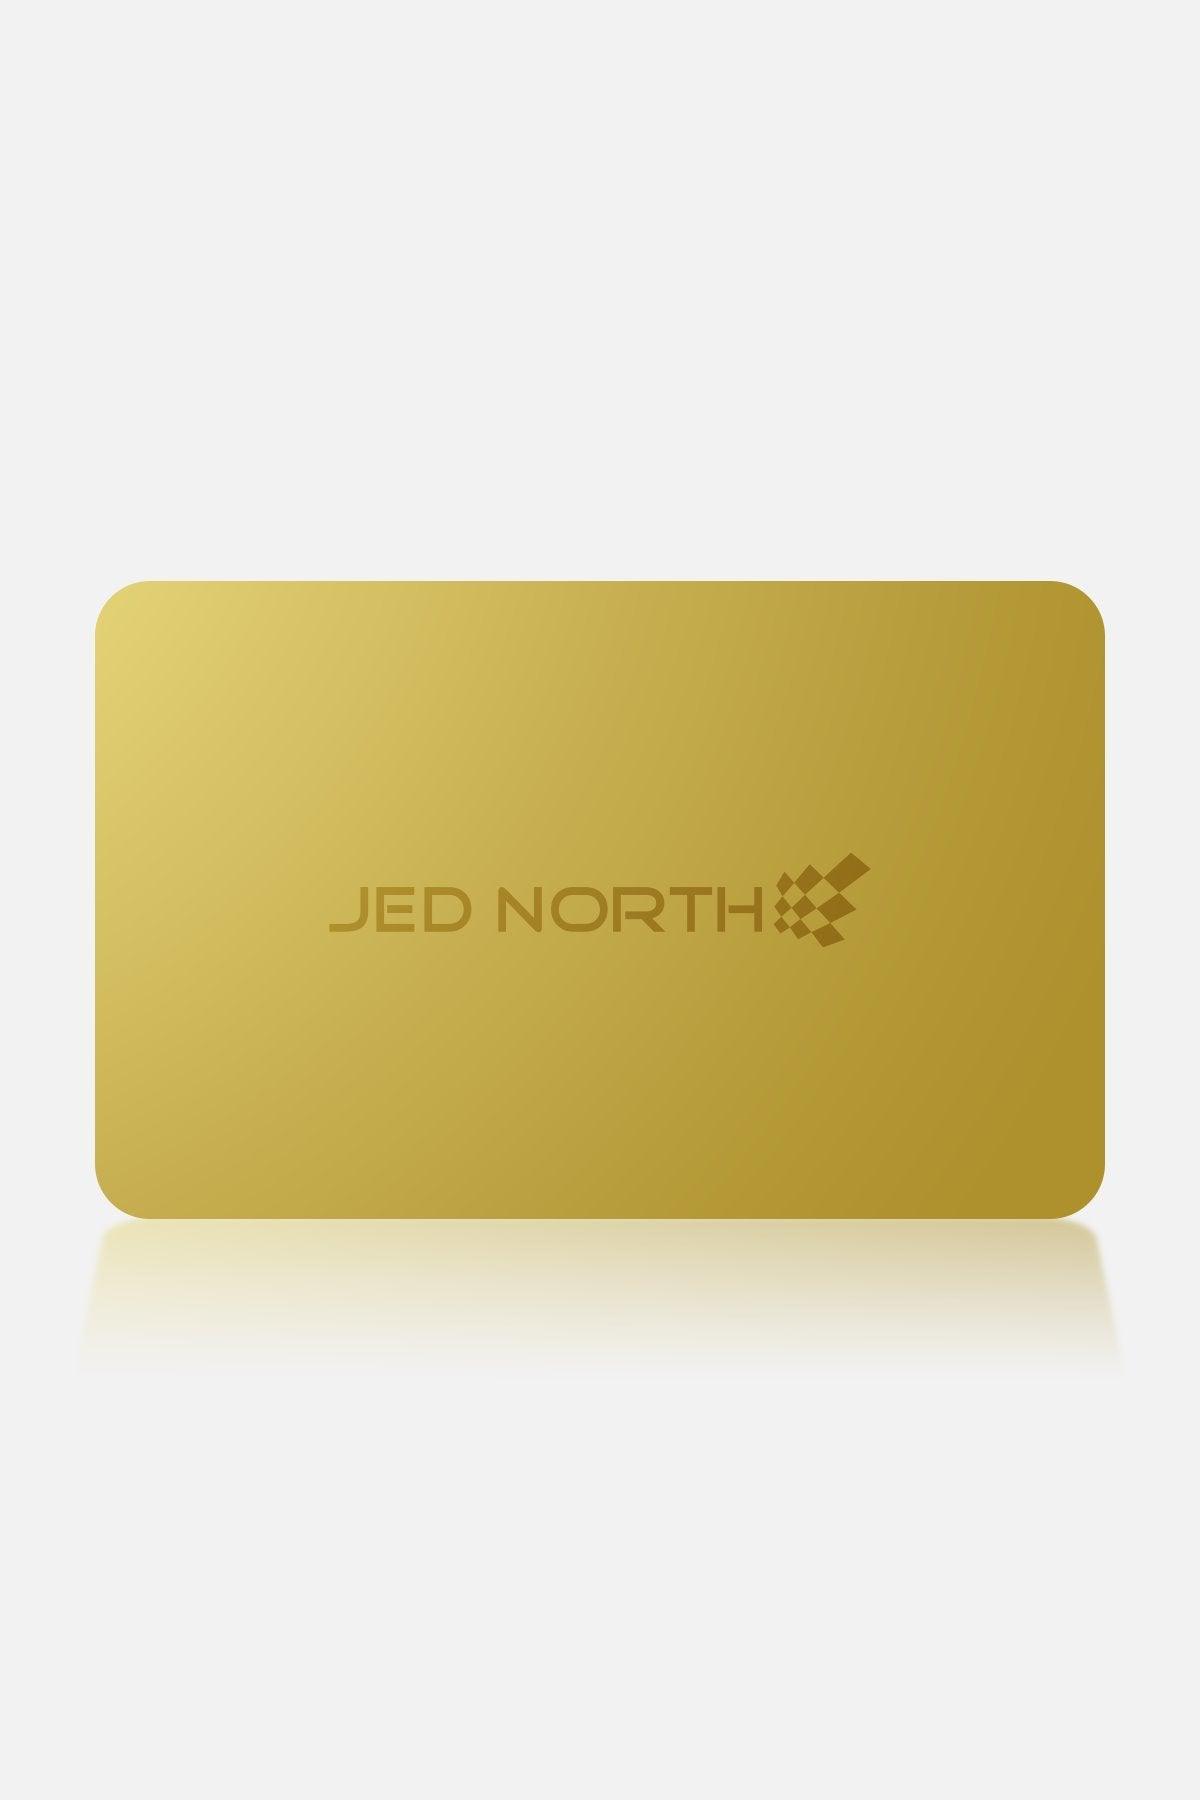 $100 Gift Card Gift Cards Jed North 